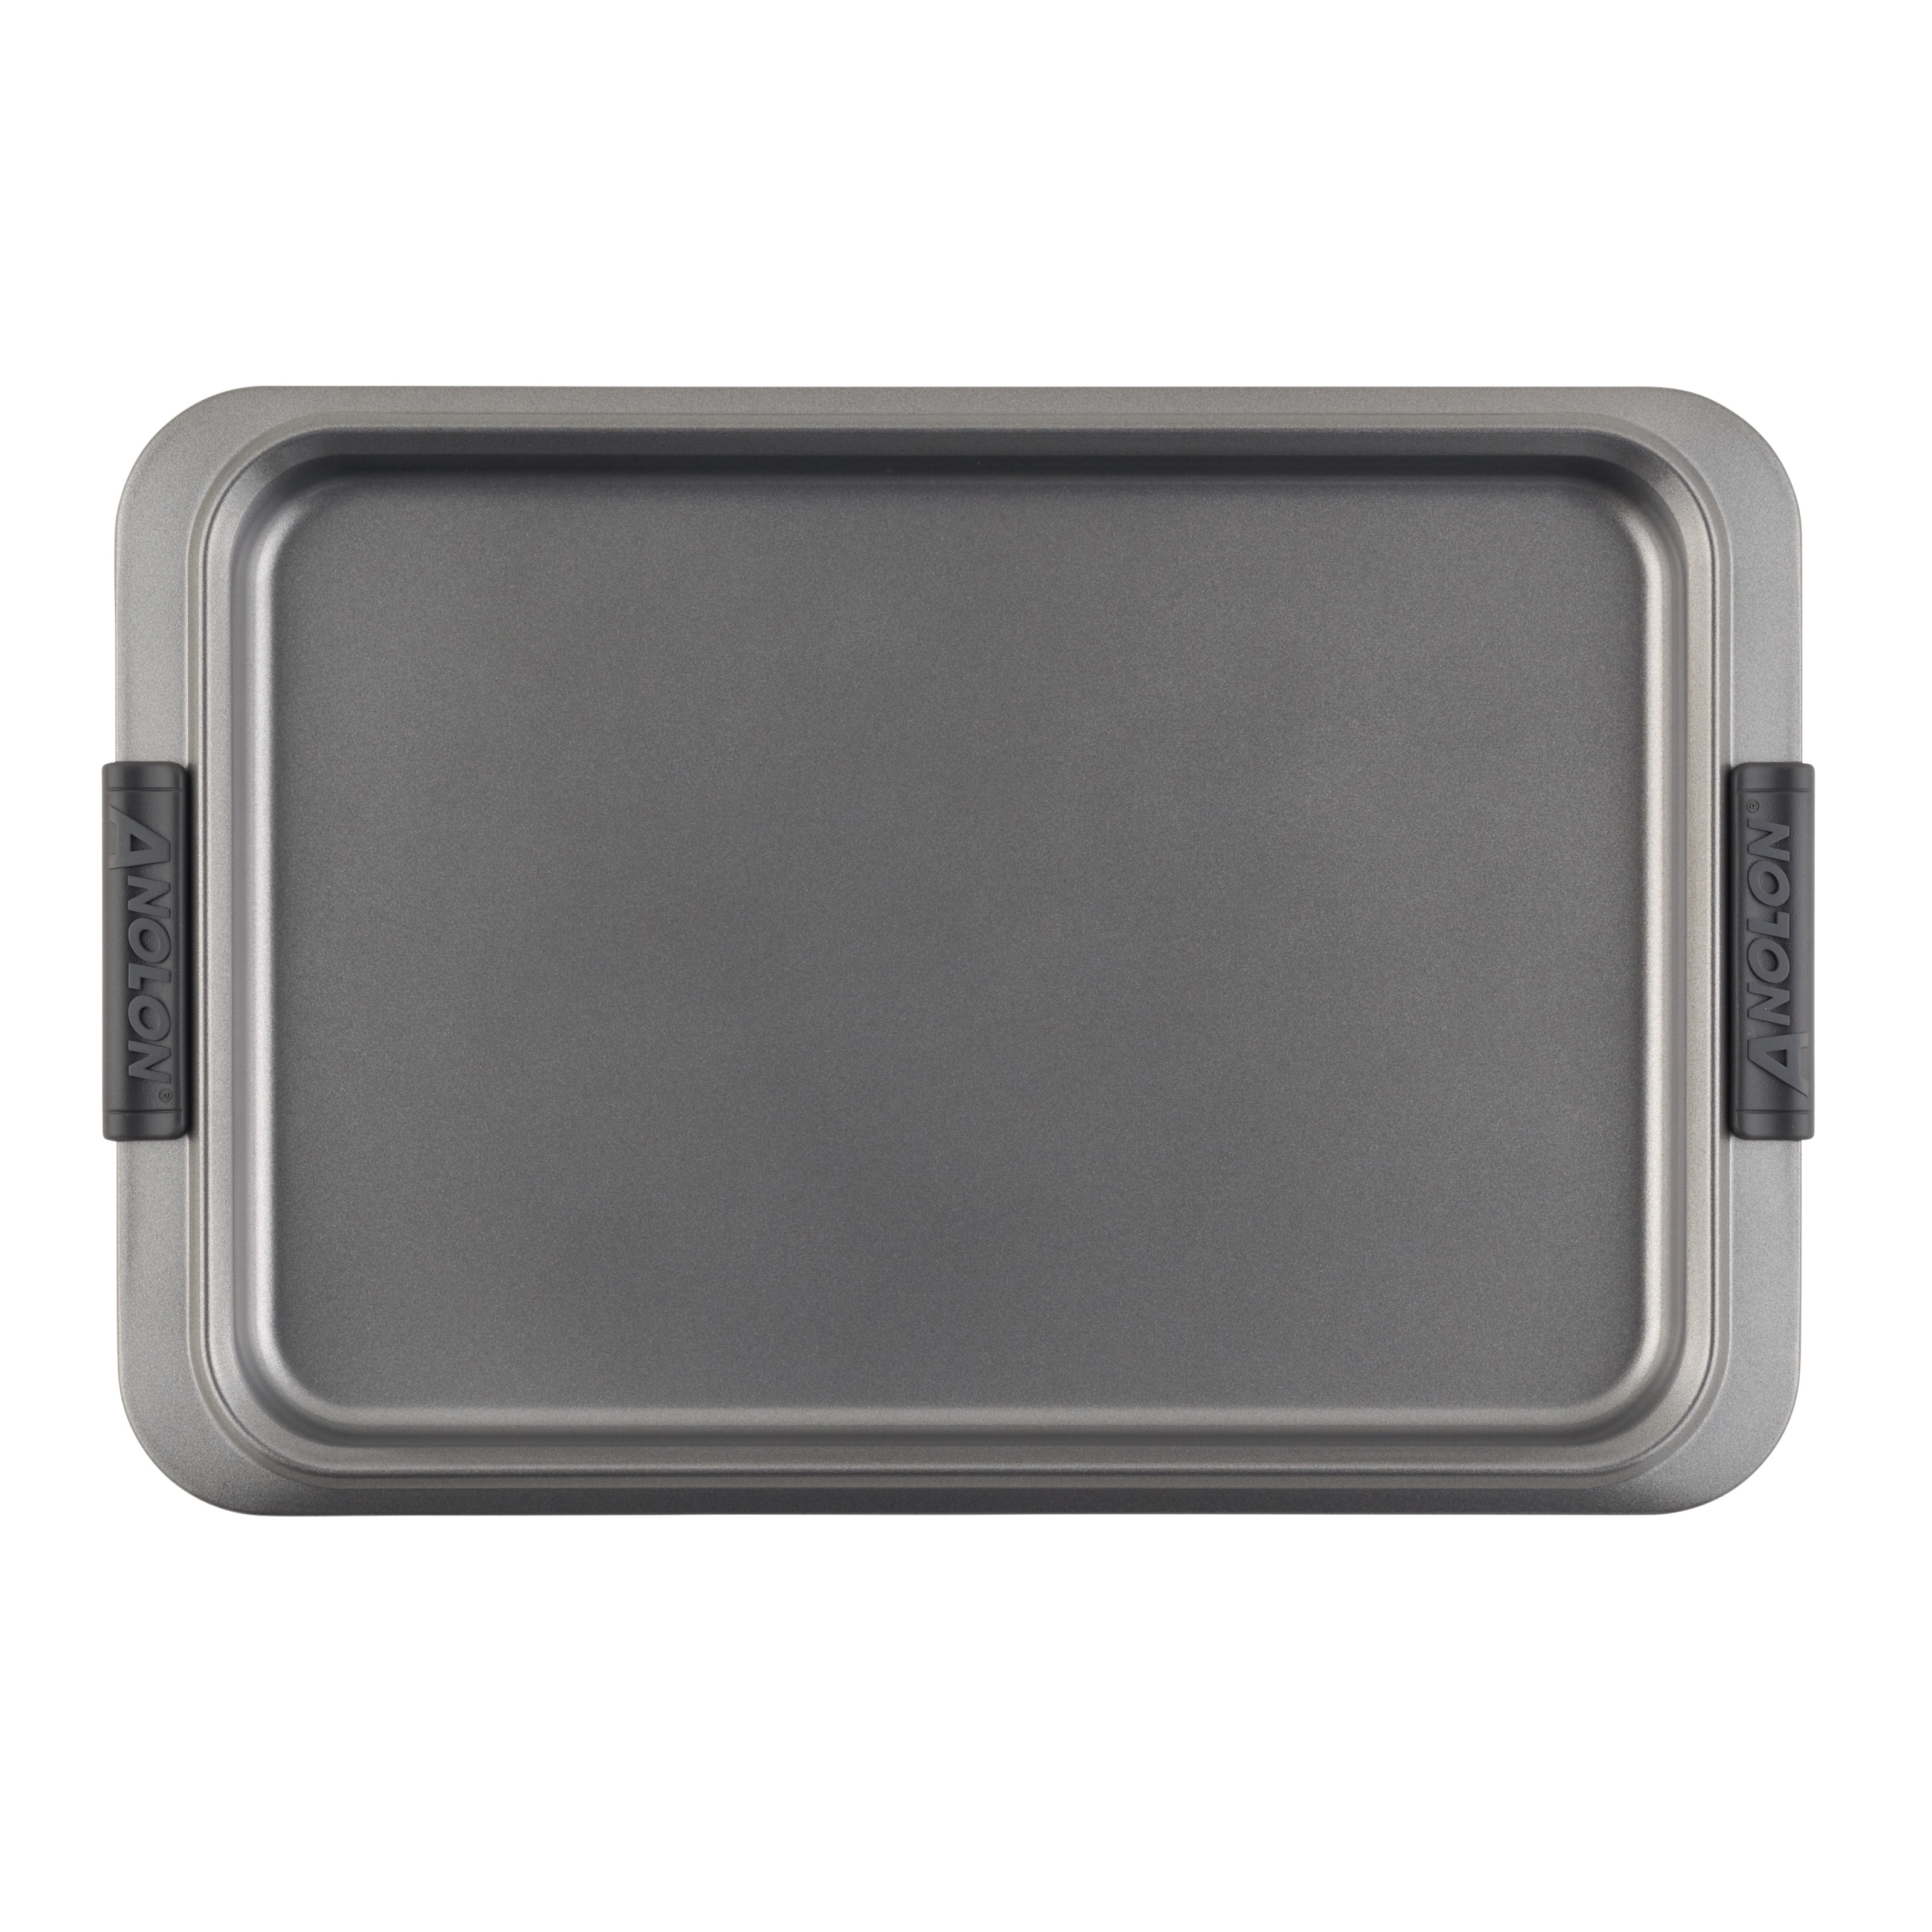 https://ak1.ostkcdn.com/images/products/is/images/direct/fbc6d75506300fed4cb07f5d3f524ca3a519f56c/Anolon-Advanced-Bakeware-Nonstick-Cookie-Sheet%2C-11-Inch-x-17-Inch%2C-Gray-with-Silicone-Grips.jpg